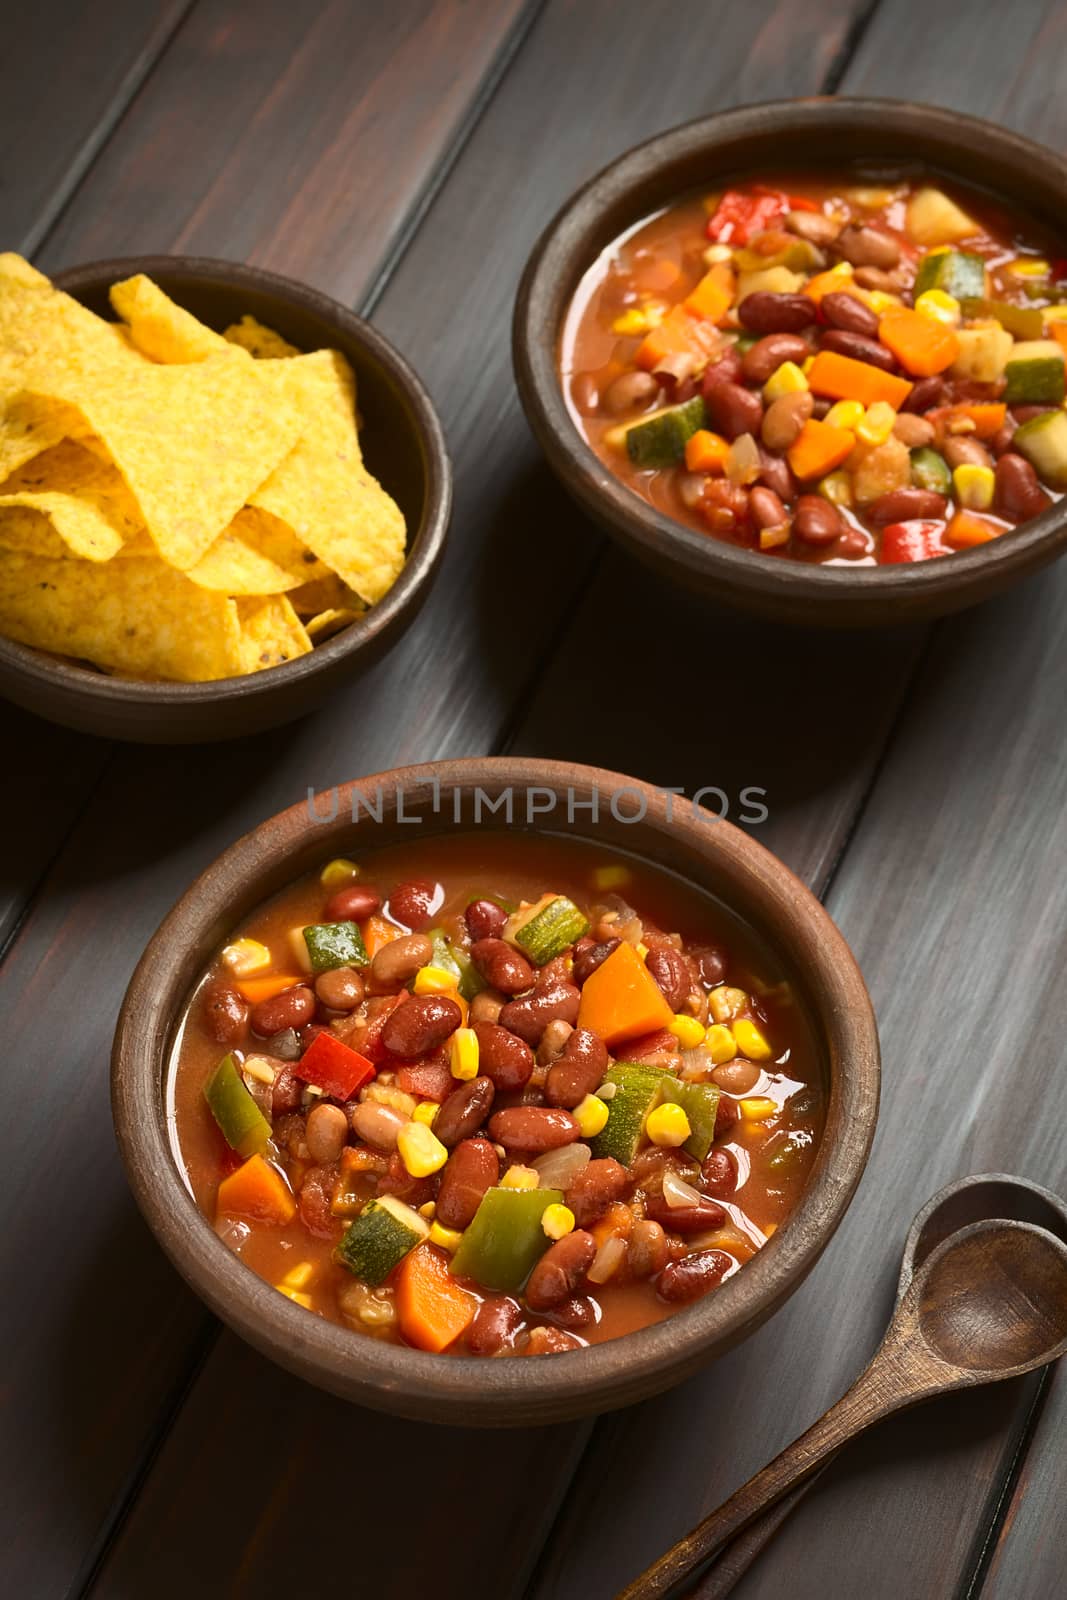 Two rustic bowls of vegetarian chili dish made with kidney bean, carrot, zucchini, bell pepper, sweet corn, tomato, onion, garlic, with tortilla chips on the side, photographed with natural light (Selective Focus, Focus in the middle of the first dish)   